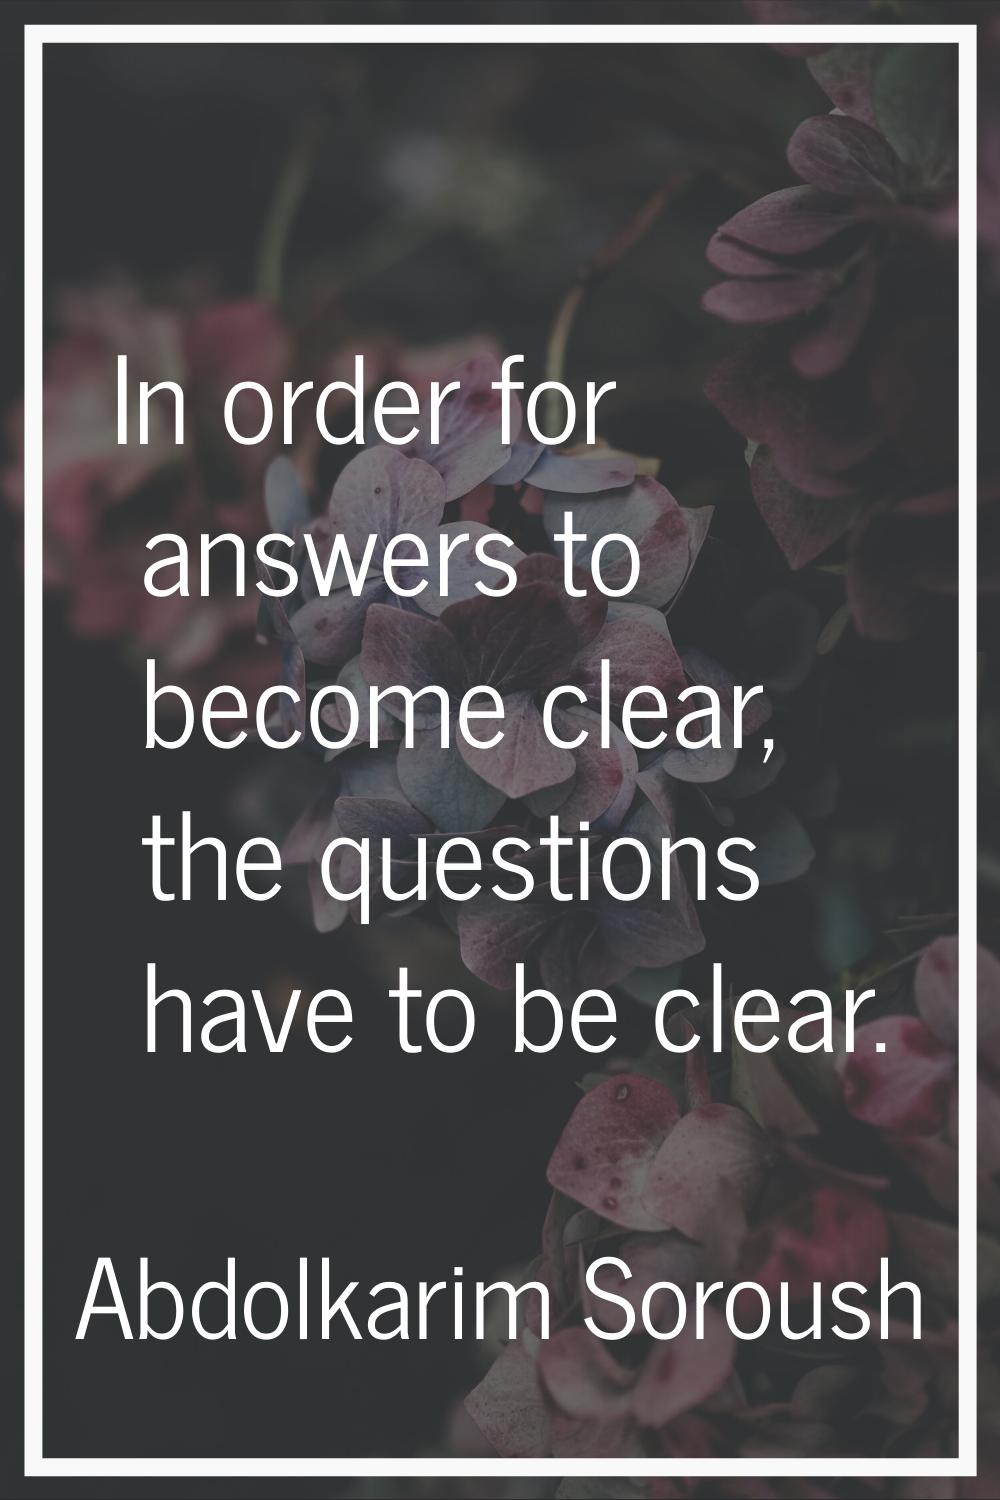 In order for answers to become clear, the questions have to be clear.